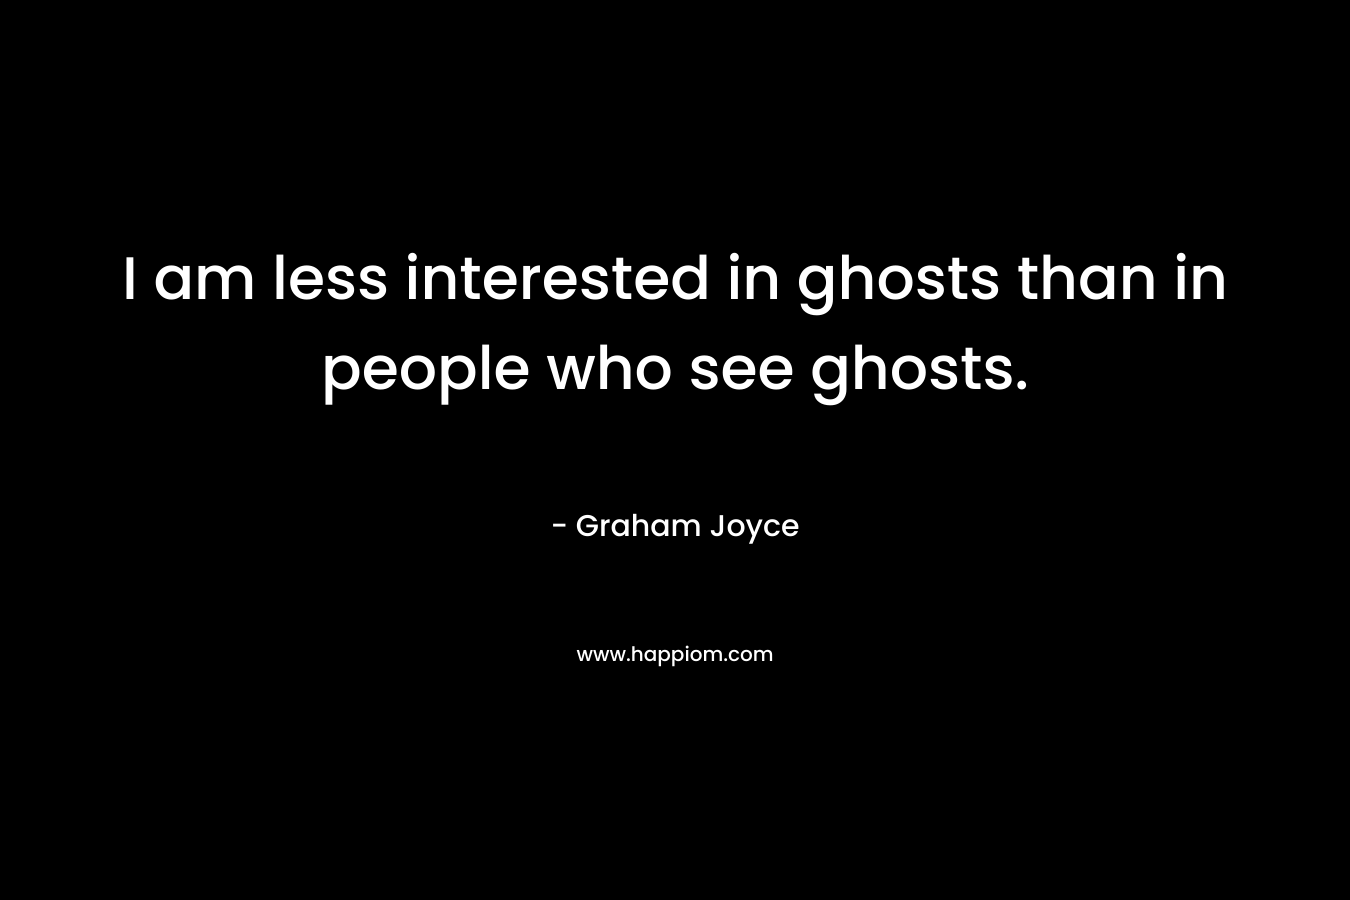 I am less interested in ghosts than in people who see ghosts.